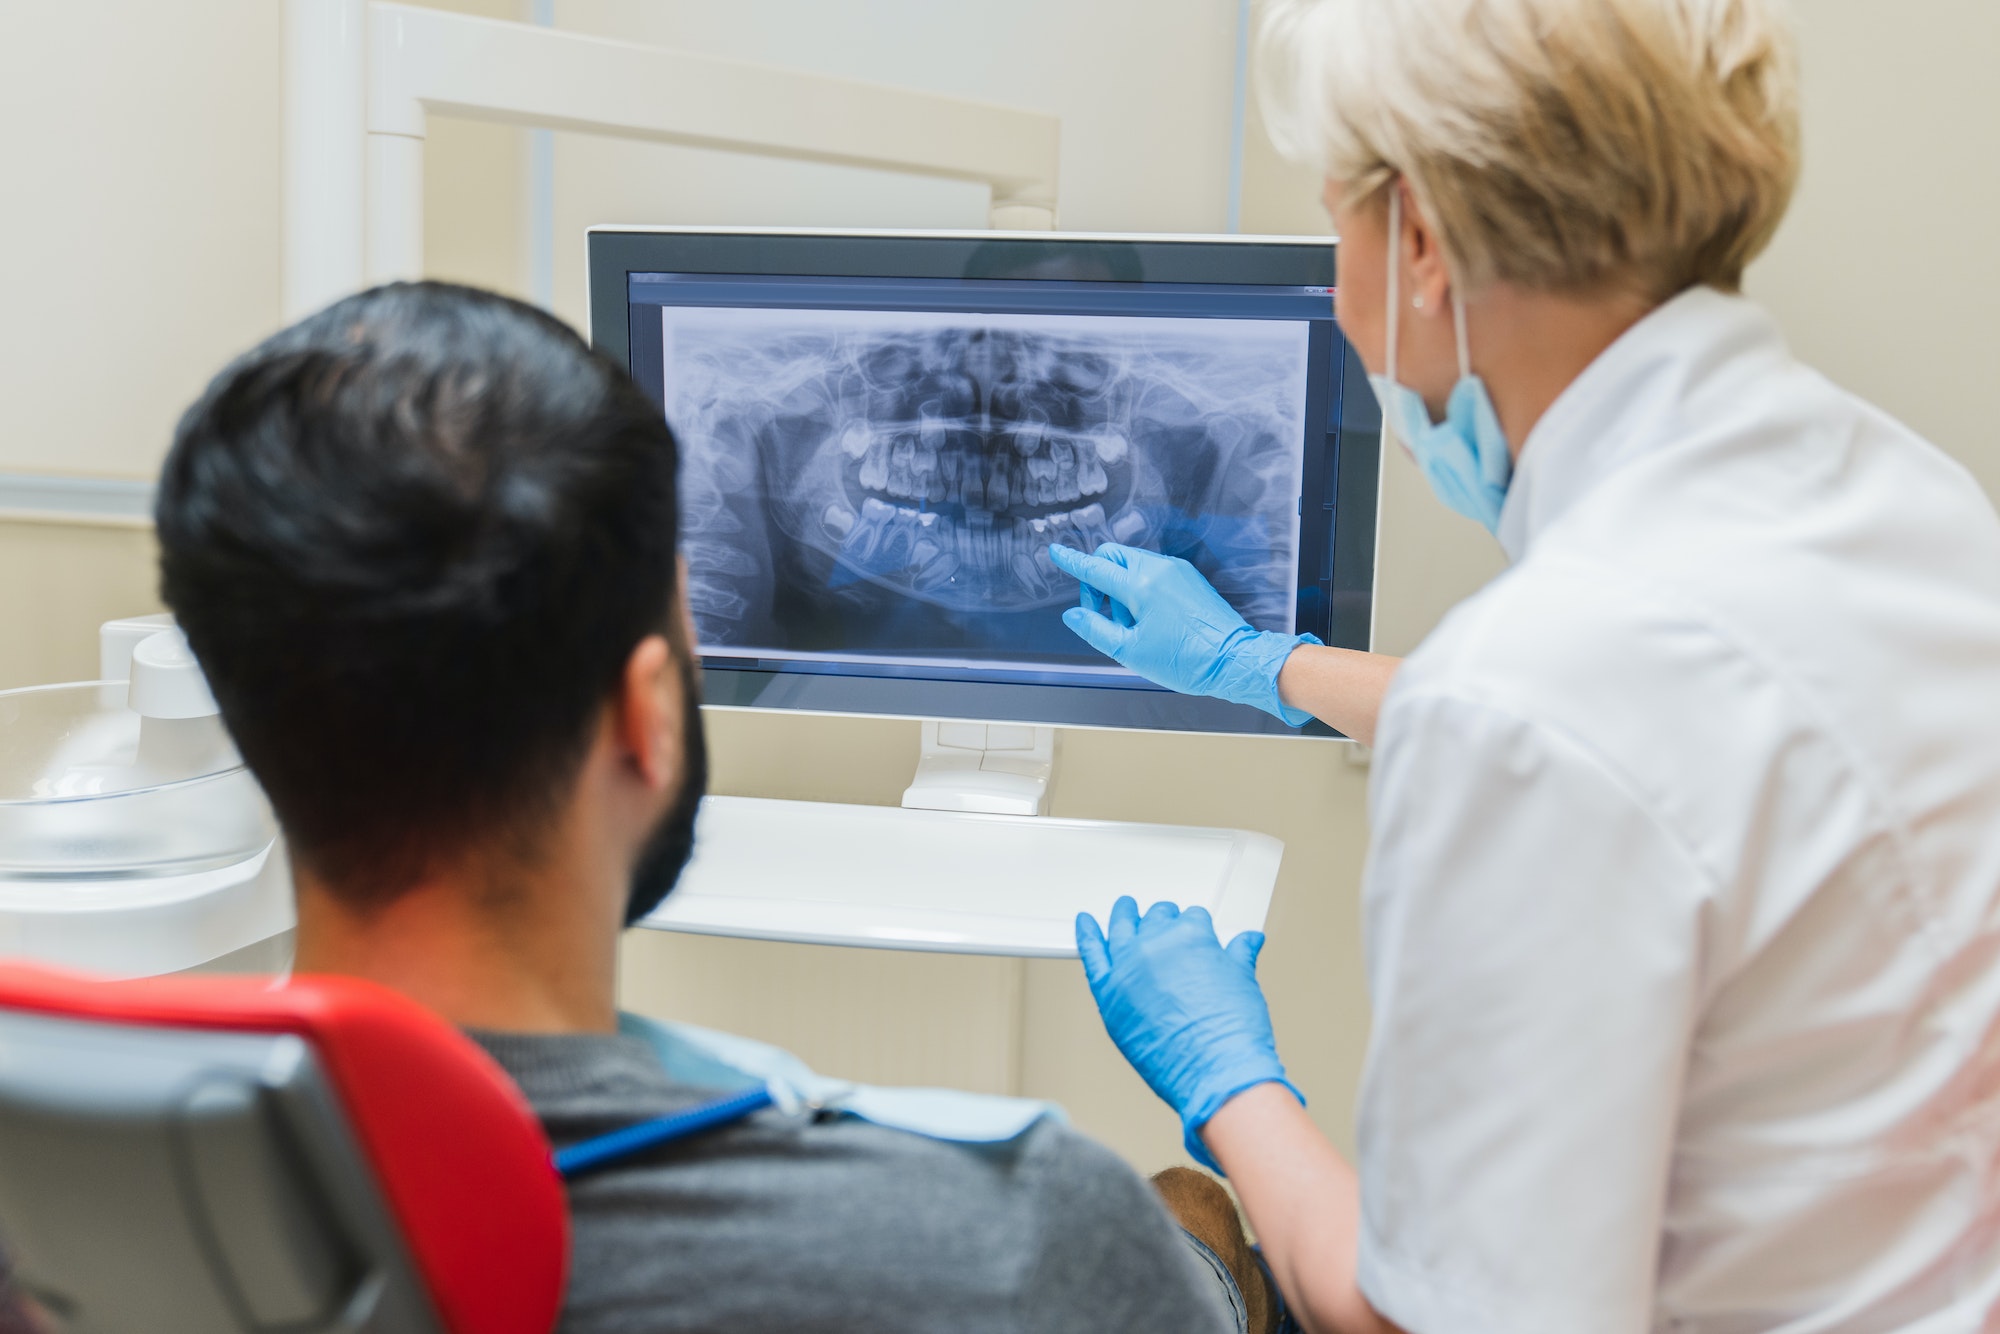 Dentist showing x-ray photo of jaws on computer screen to a male patient in dental clinic.